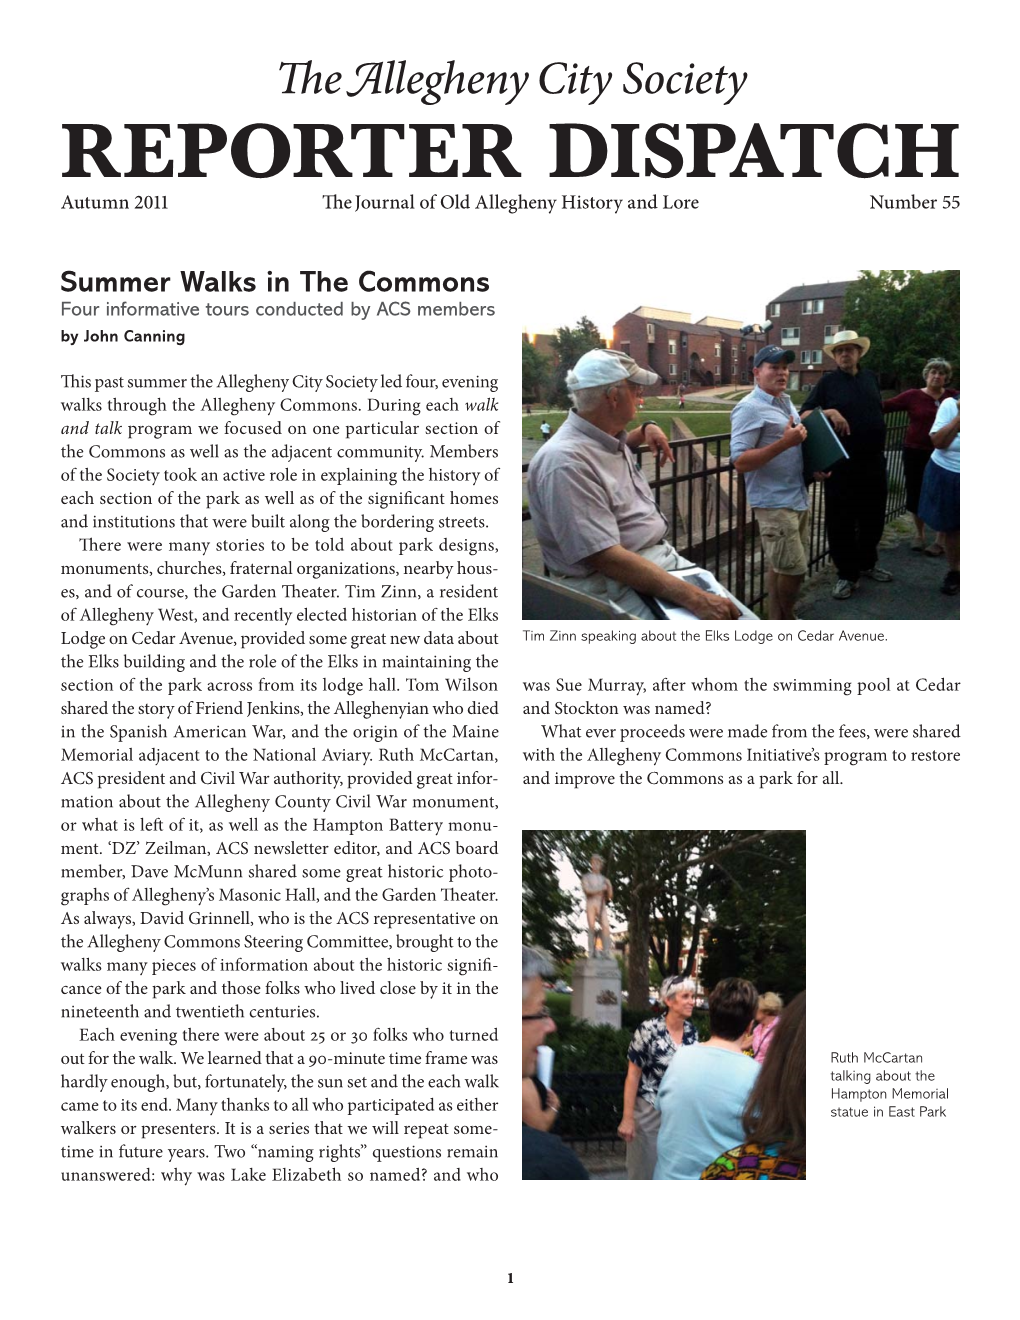 REPORTER DISPATCH Autumn 2011 the Journal of Old Allegheny History and Lore Number 55